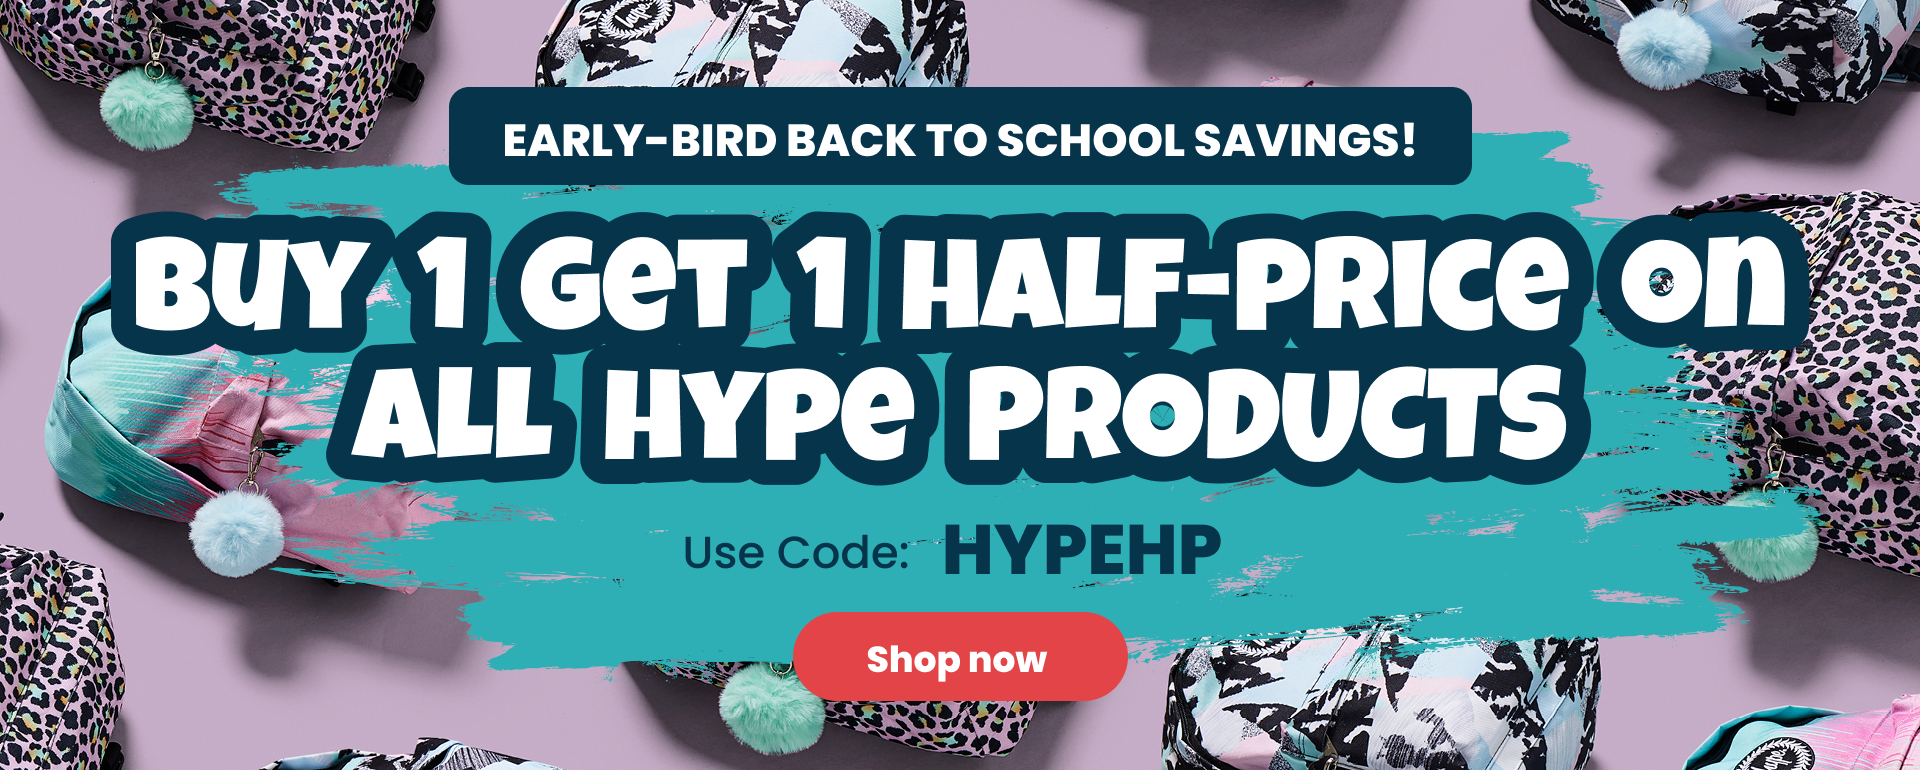 Early-bird back to school savings, Buy 1 get 1 half price on all Hype products  - use code HYPEHP